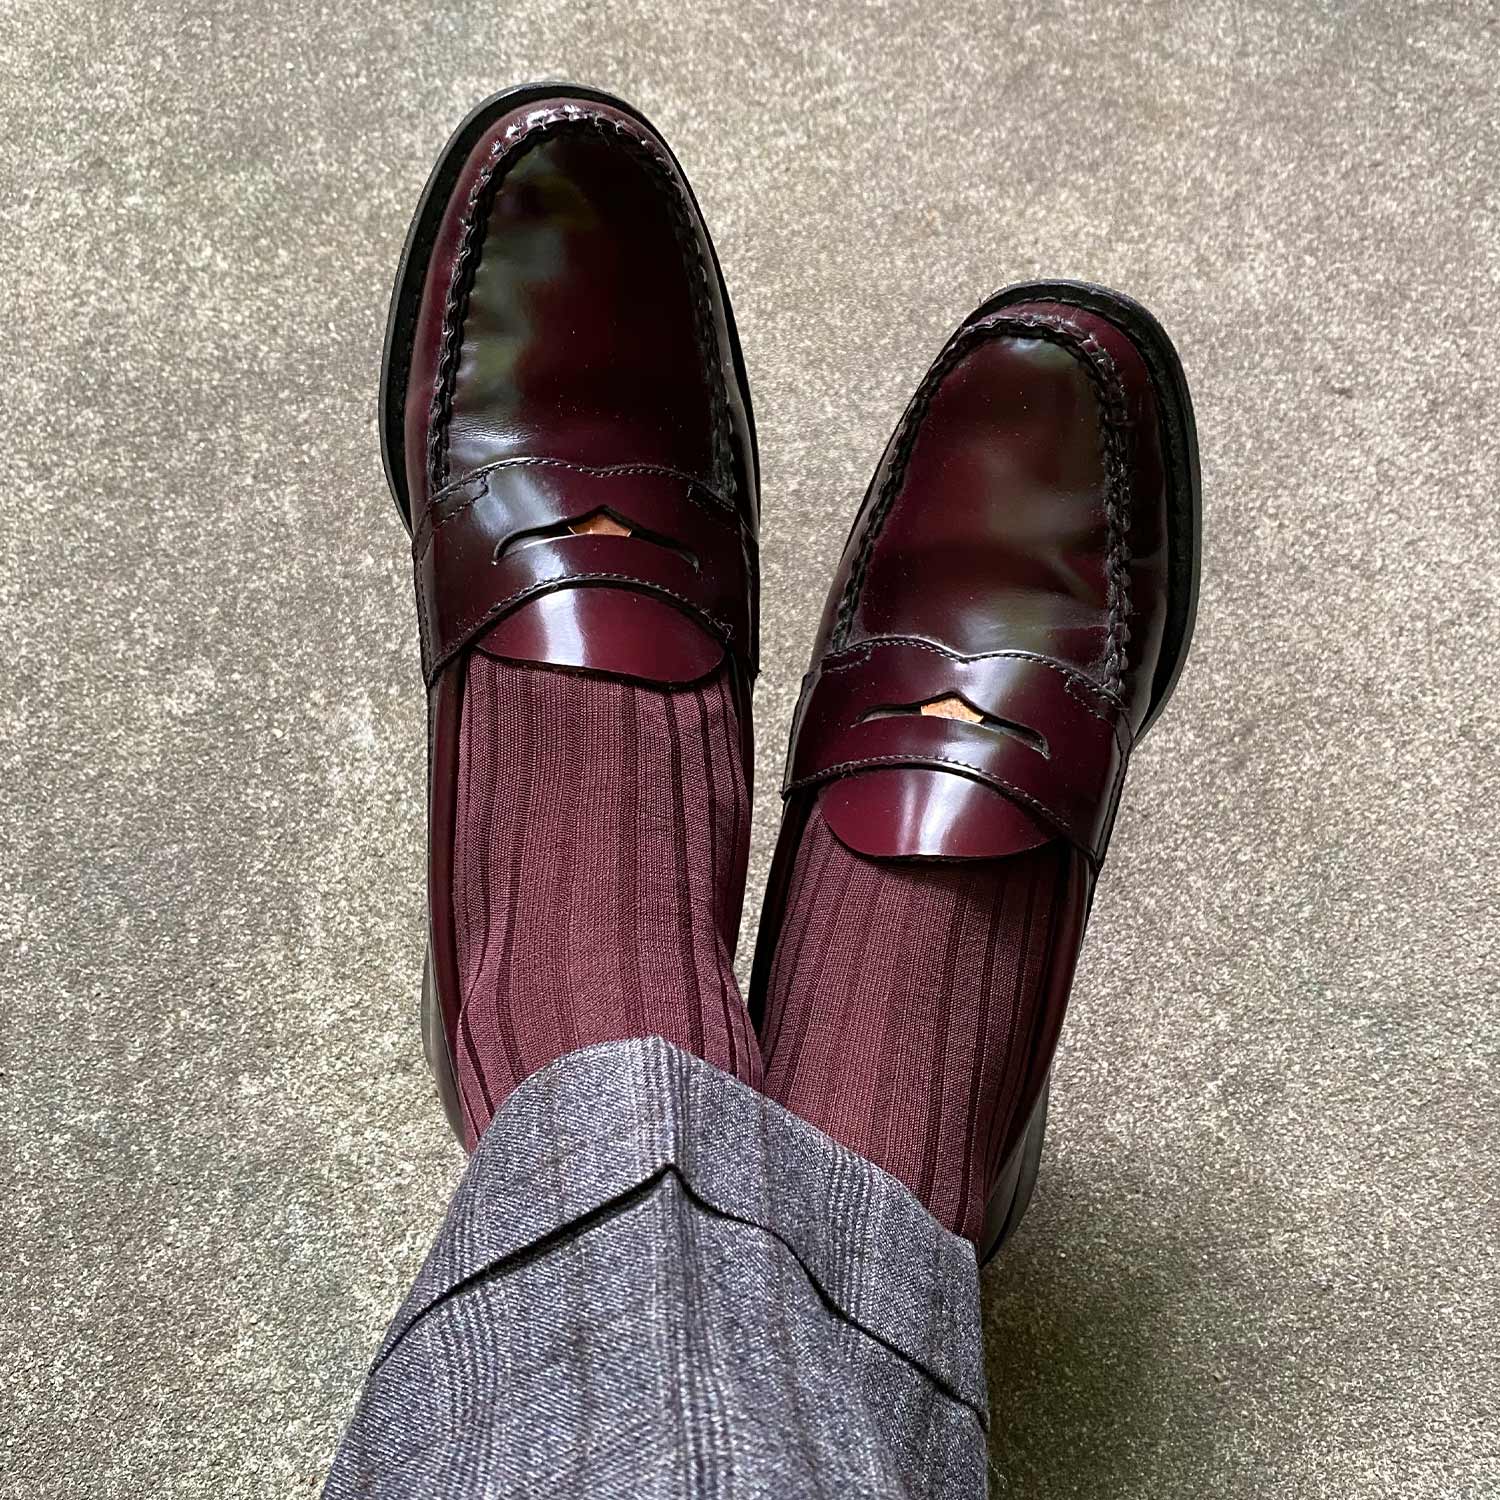 Burgundy socks pair with burgundy loafers and grey pants